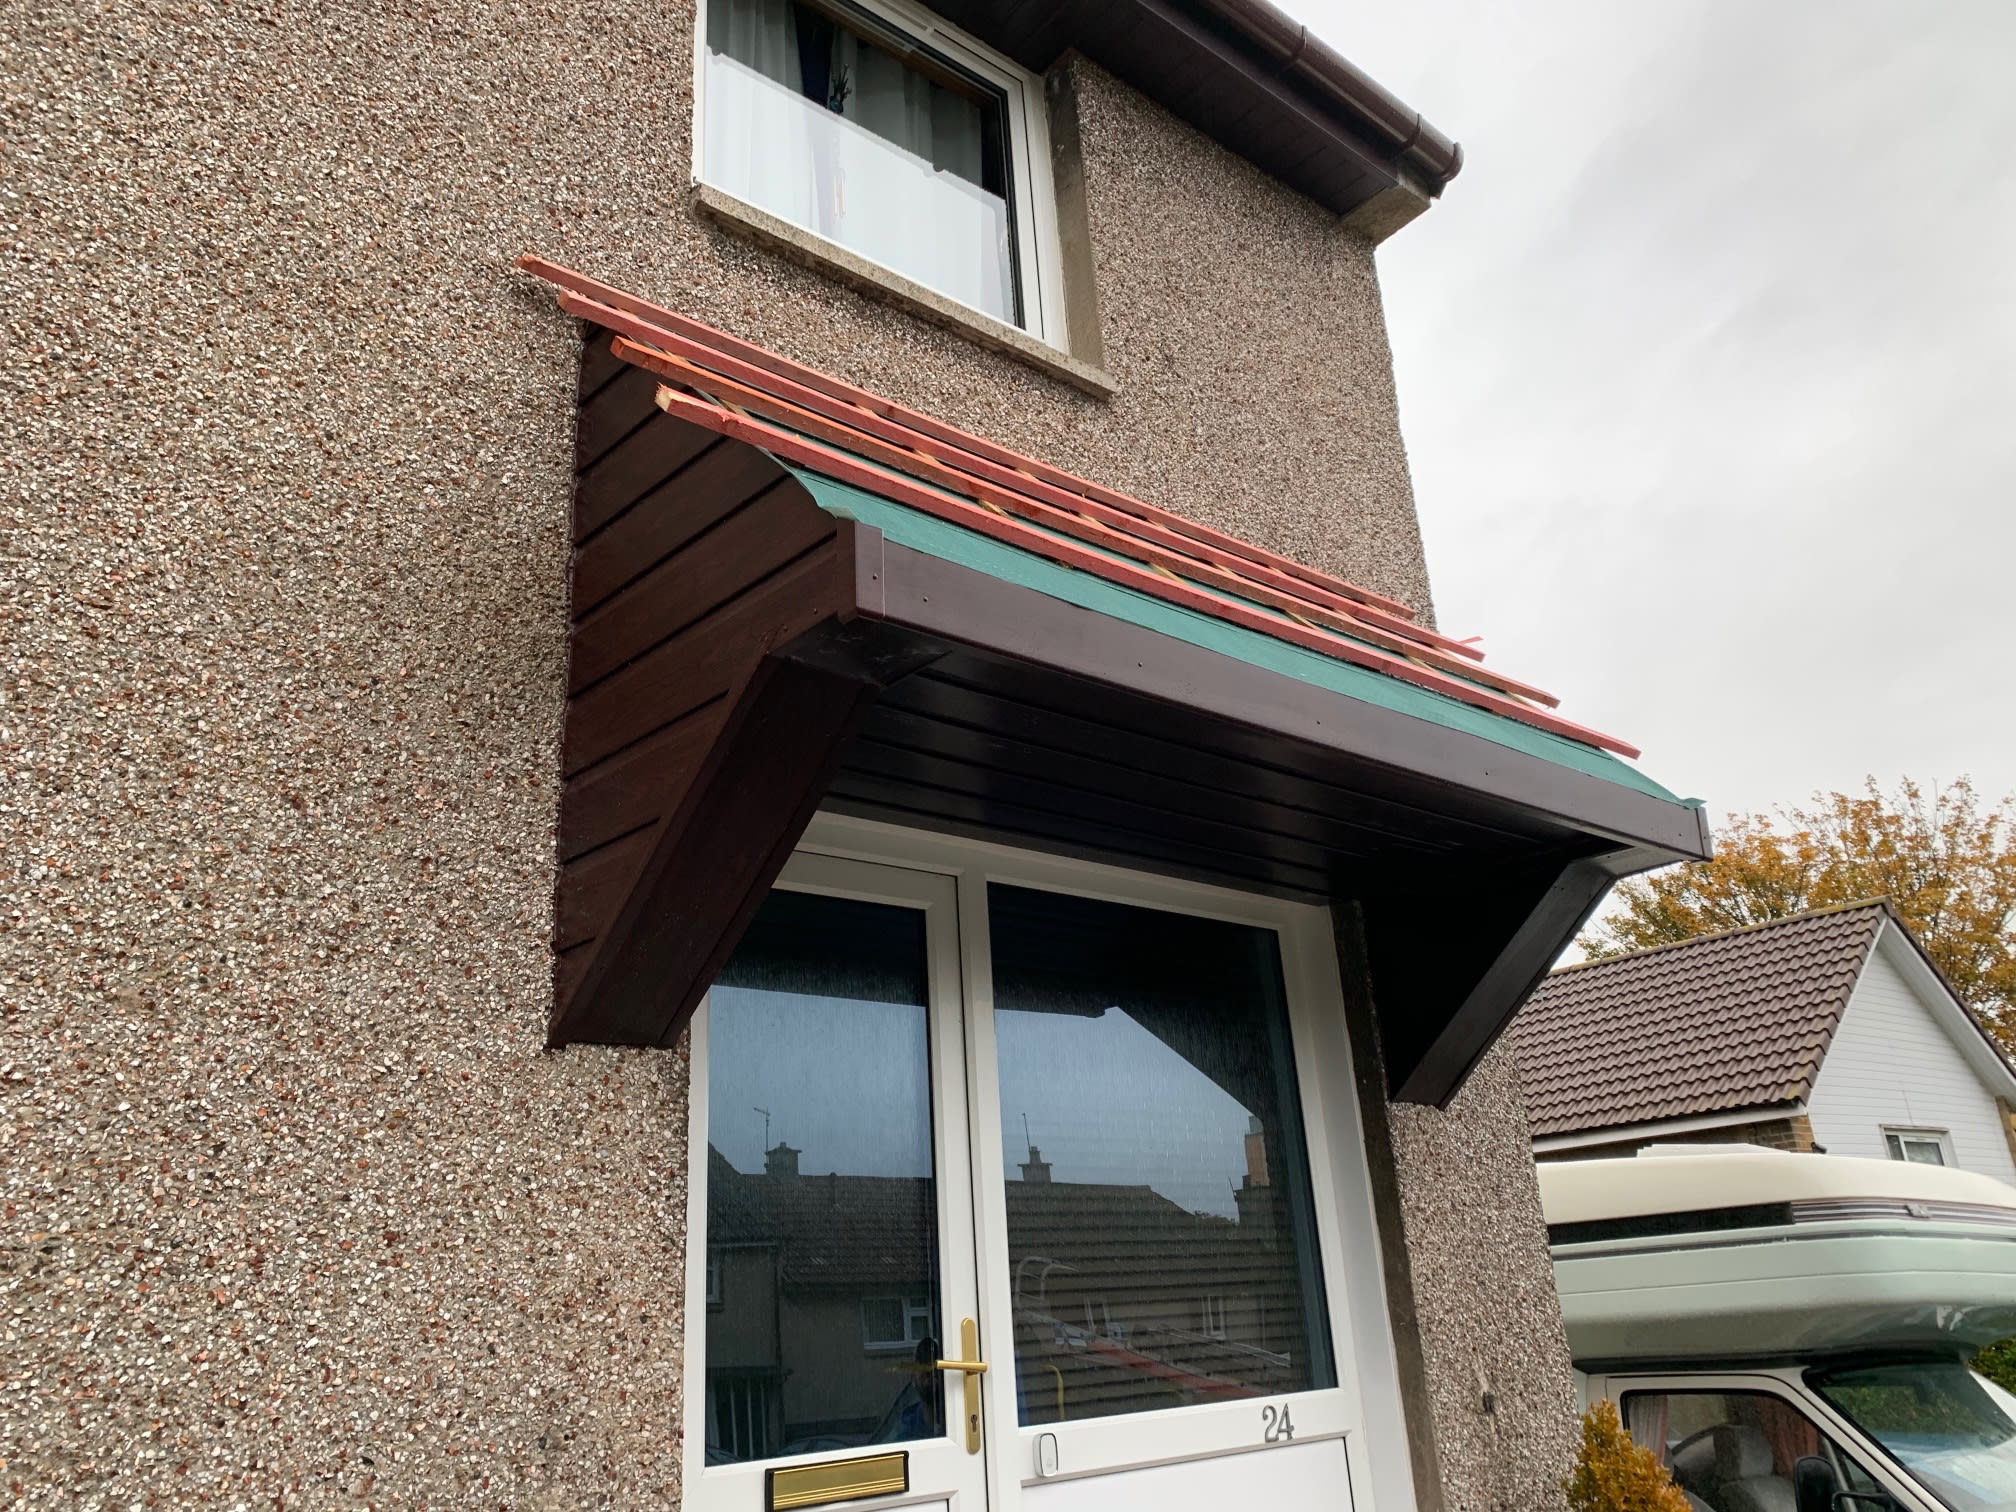 S M Roofing & Building Ltd Glenrothes 01592 612378